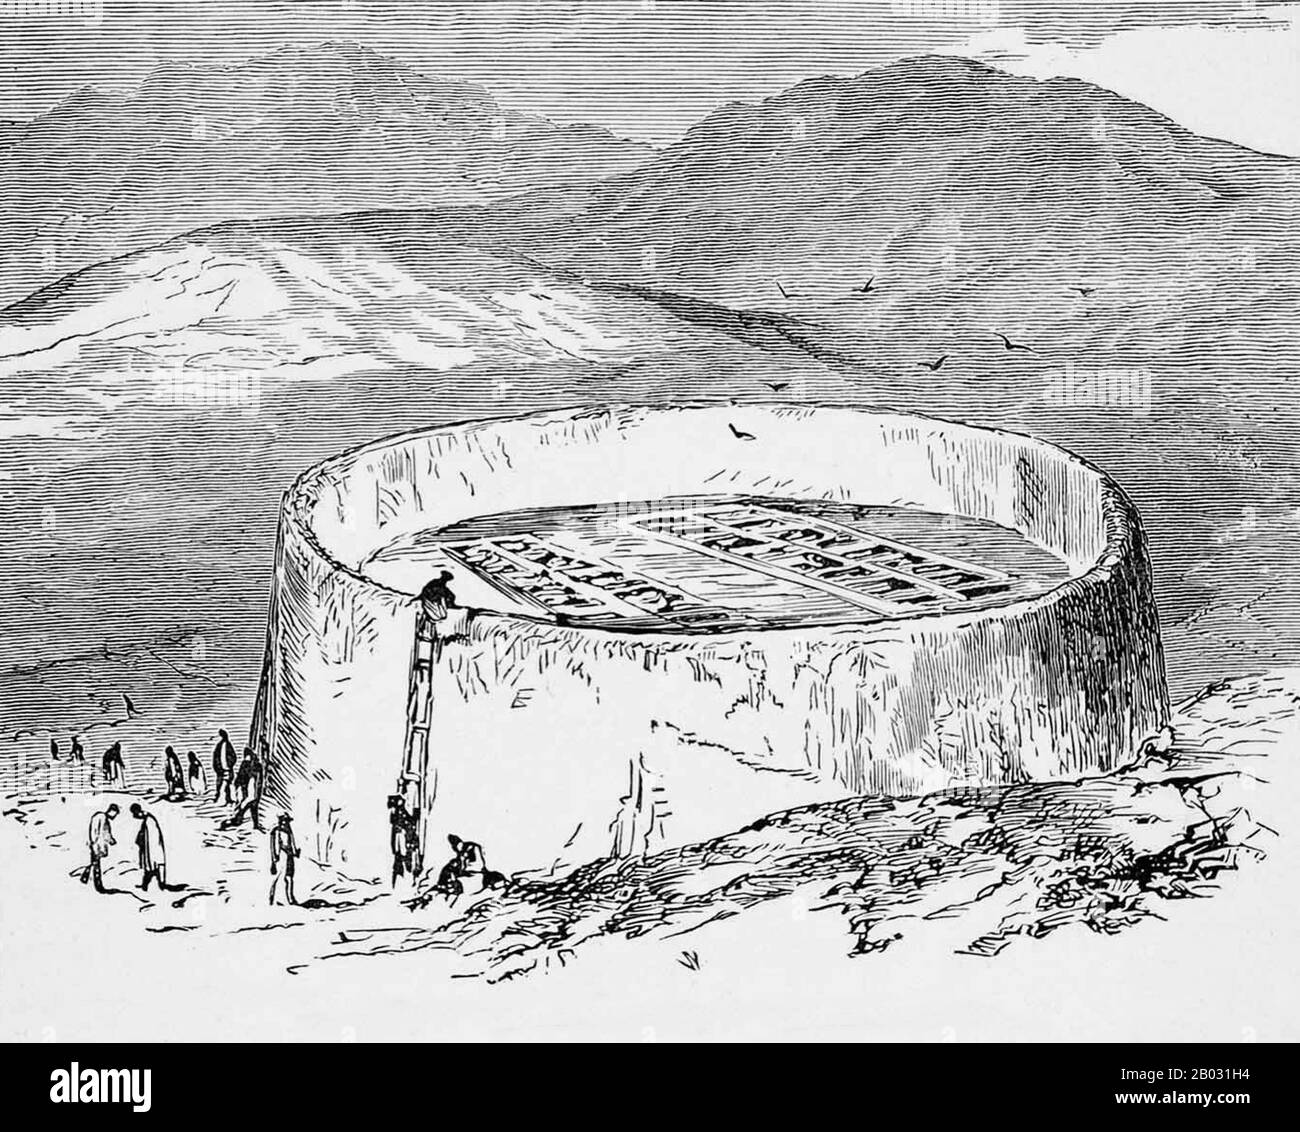 A Tower of Silence or Dakhma is a circular, raised structure used by Zoroastrians for exposure of the dead. There is no standard technical name for such a construction. The common dakhma or dokhma (from Middle Persian dakhmag) originally denoted any place for the dead. Similarly, in the medieval texts of Zoroastrian tradition, the word astodan appears, but today denotes an ossuary.  In the Iranian provinces of Yazd and Kerman, the technical term is deme or dema. In India, the term doongerwadi came into use after a tower was constructed on a hill of that name. The word dagdah appears in the tex Stock Photo